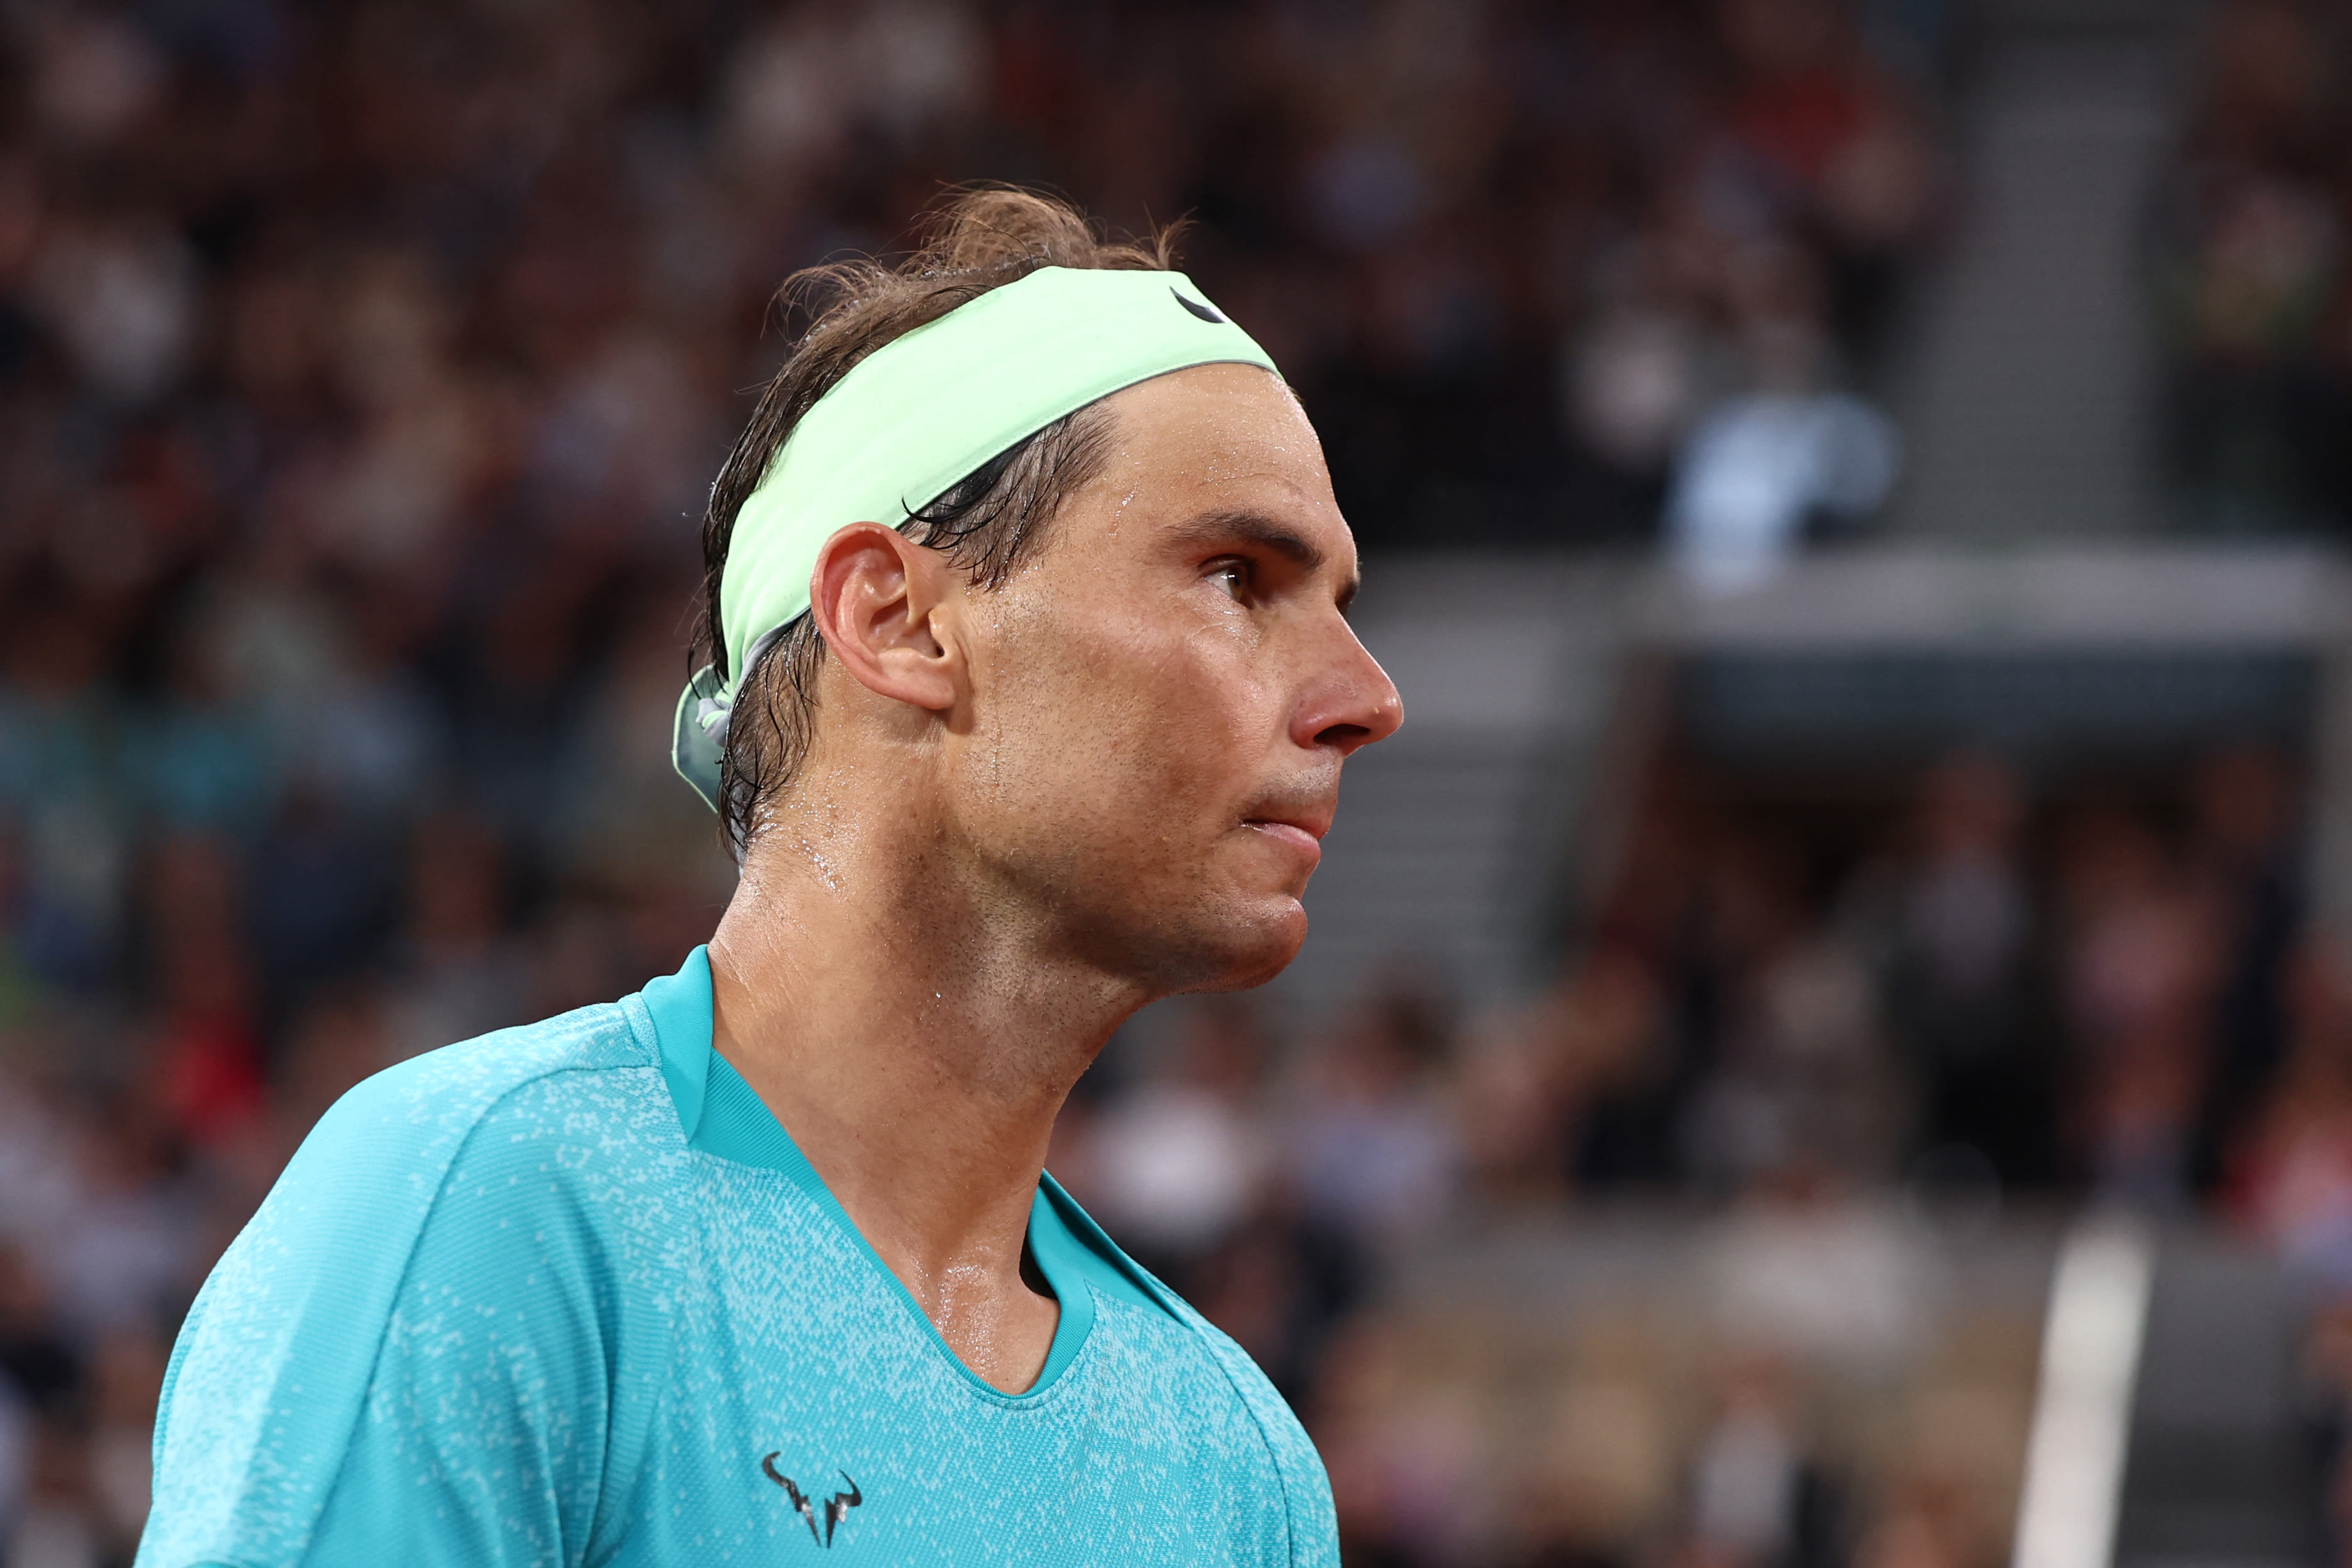 French Open: Rafael Nadal loses in straight sets to Alexander Zverev in first round